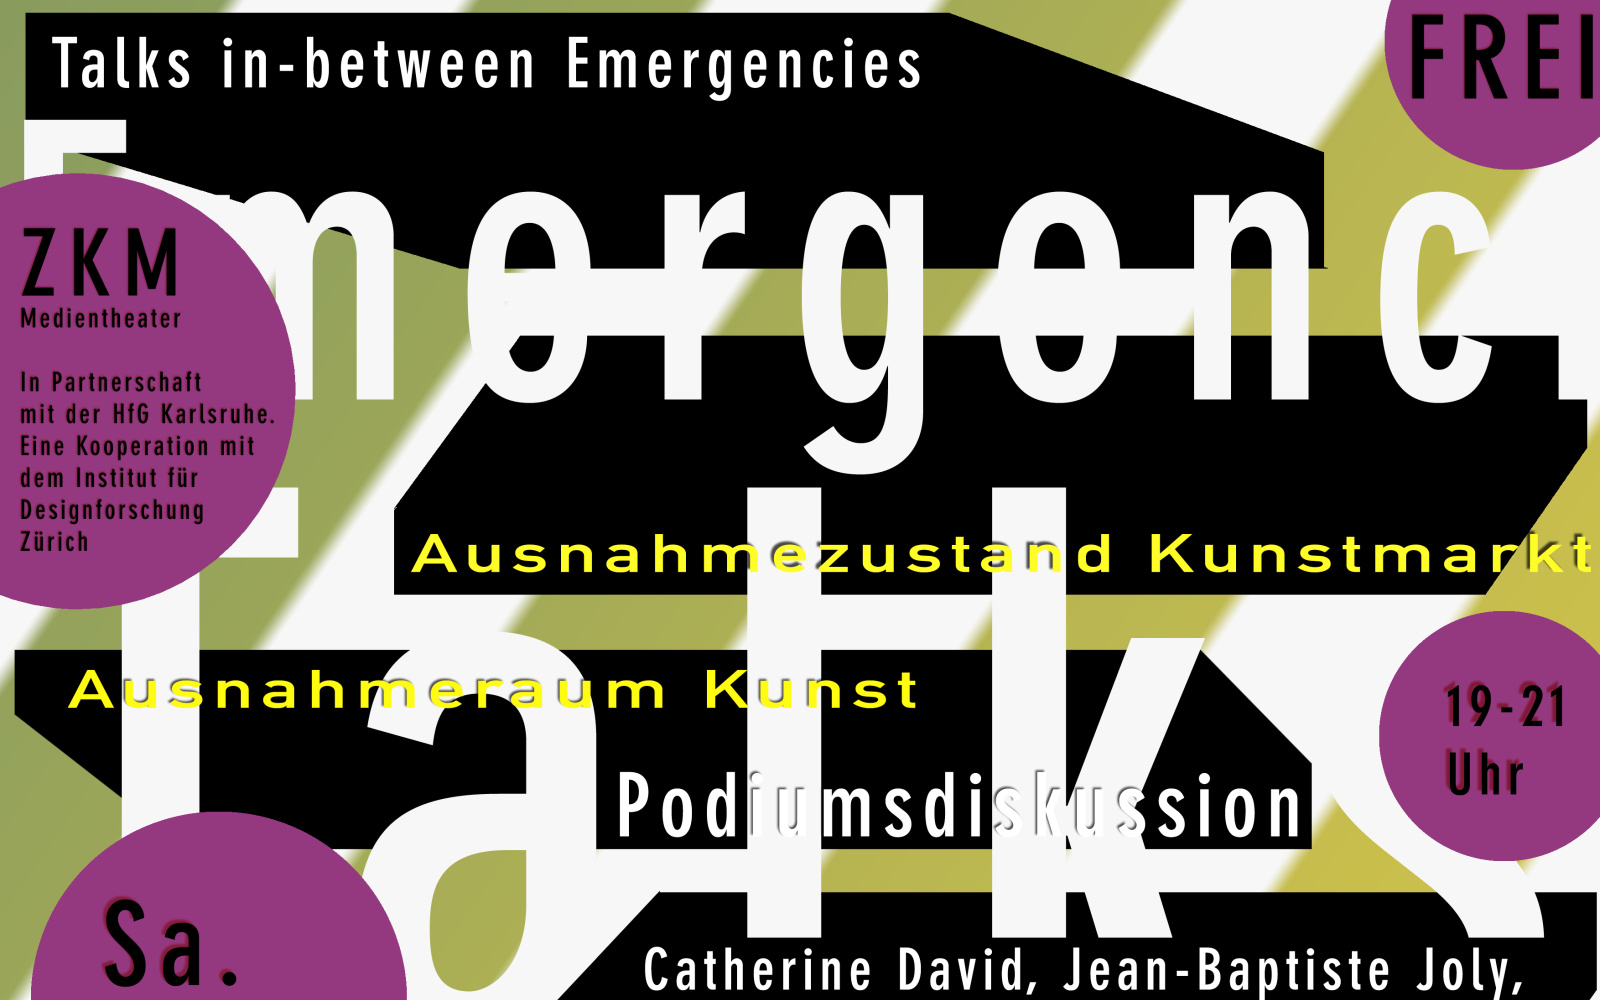 Poster of the converence »Talks in-between Emergencies«